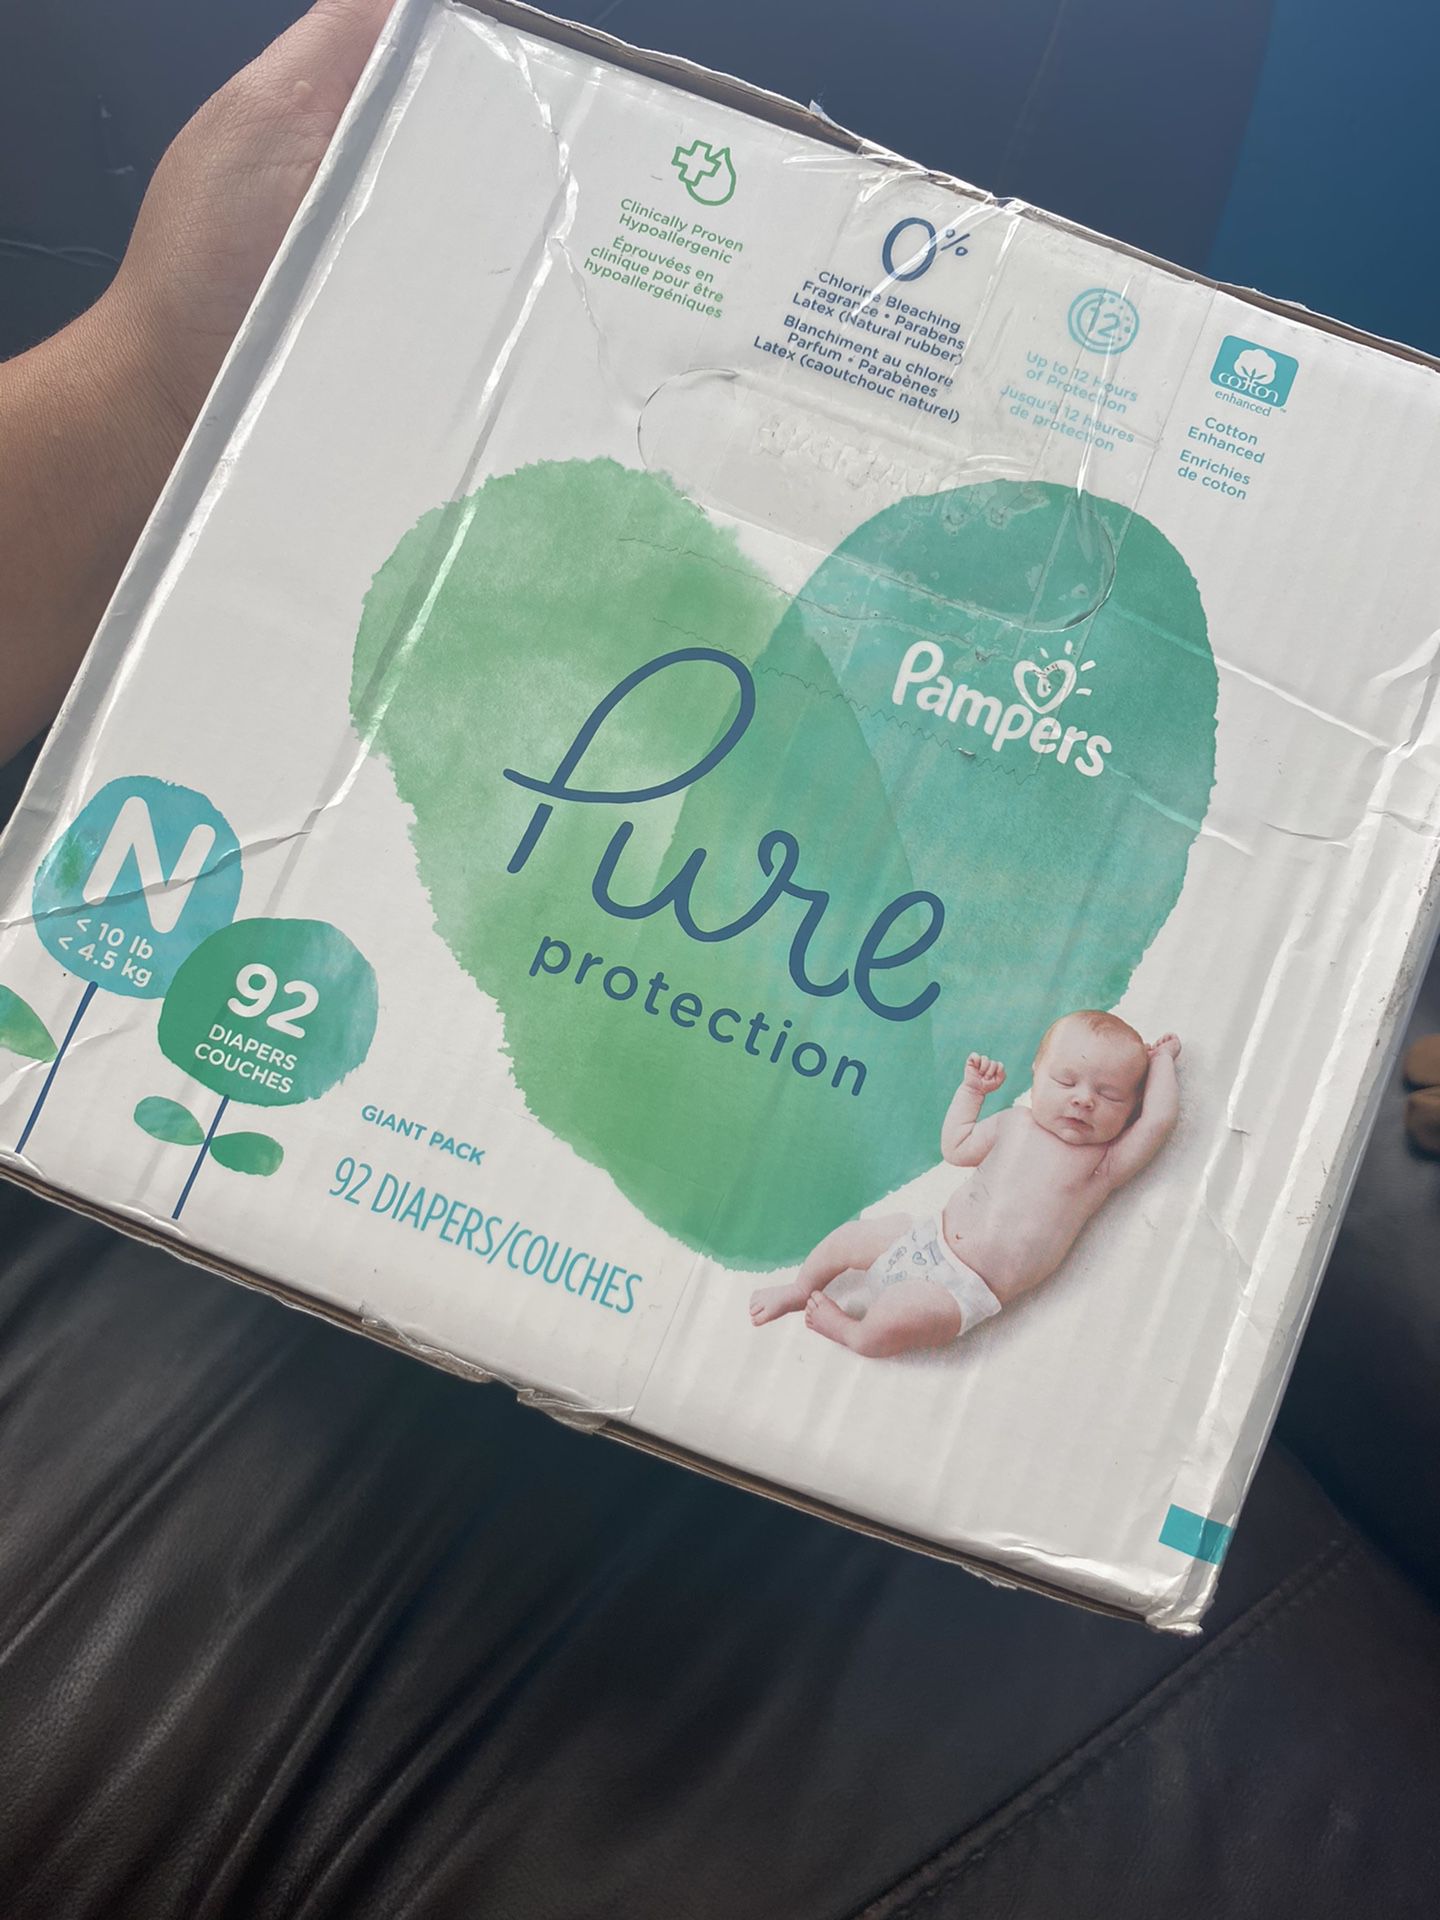 PAMPERS DIAPERS